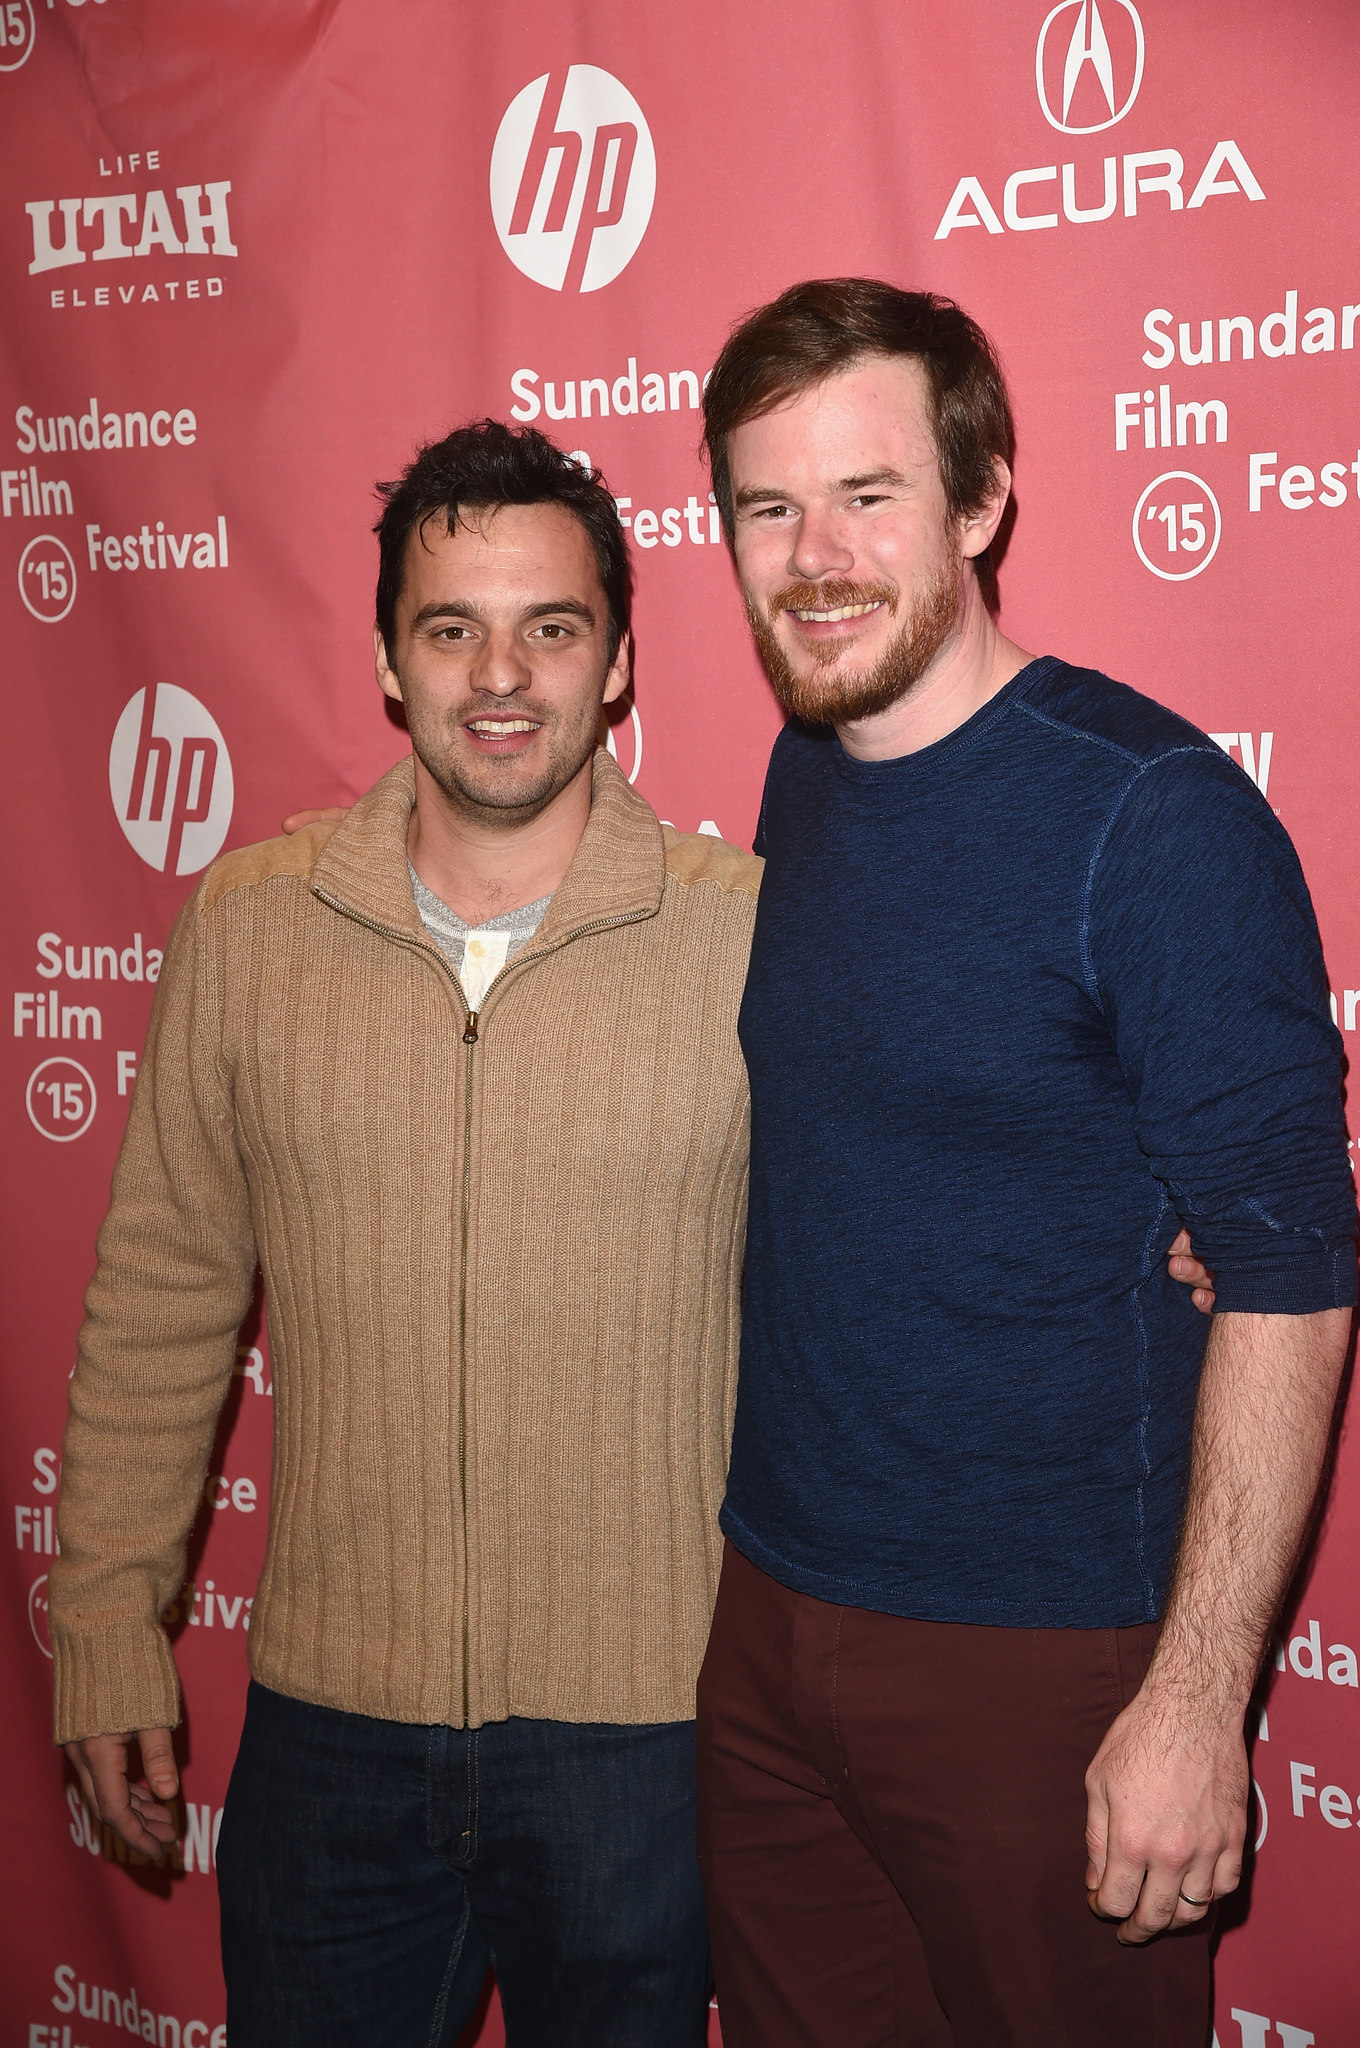 Joe Swanberg and Jake Johnson at event of Digging for Fire (2015)